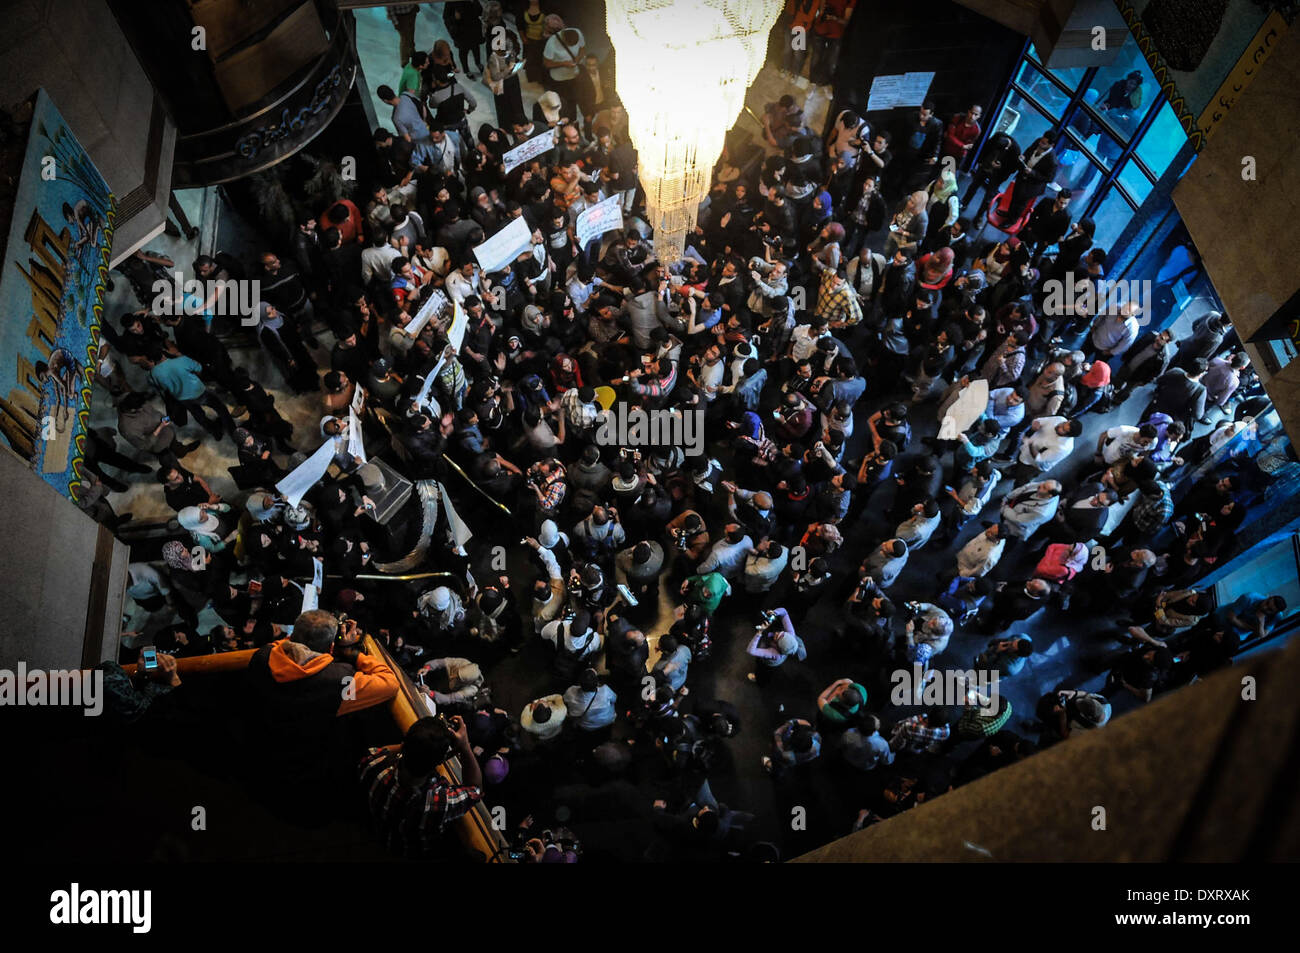 Cairo, Egypt. 29th Mar, 2014. Dozens of journalists and activists, inside the lobby of the Journalists' Syndicate, on Saturday evening, to condemn the killing of Mayada Ashraf, working on liberated newspaper Â«DoustorÂ», during coverage of the clashes between demonstrators belonging to MB and security forces. Journalist who died amid Friday clashes between police and Muslim Brotherhood supporters was killed by a gunshot wound to the head, according to forensics official Hisham Abdel Hamid. 22 year-old journalist Mayada Ashraf, who was killed during clashes between Egyptian police and Muslim B Stock Photo